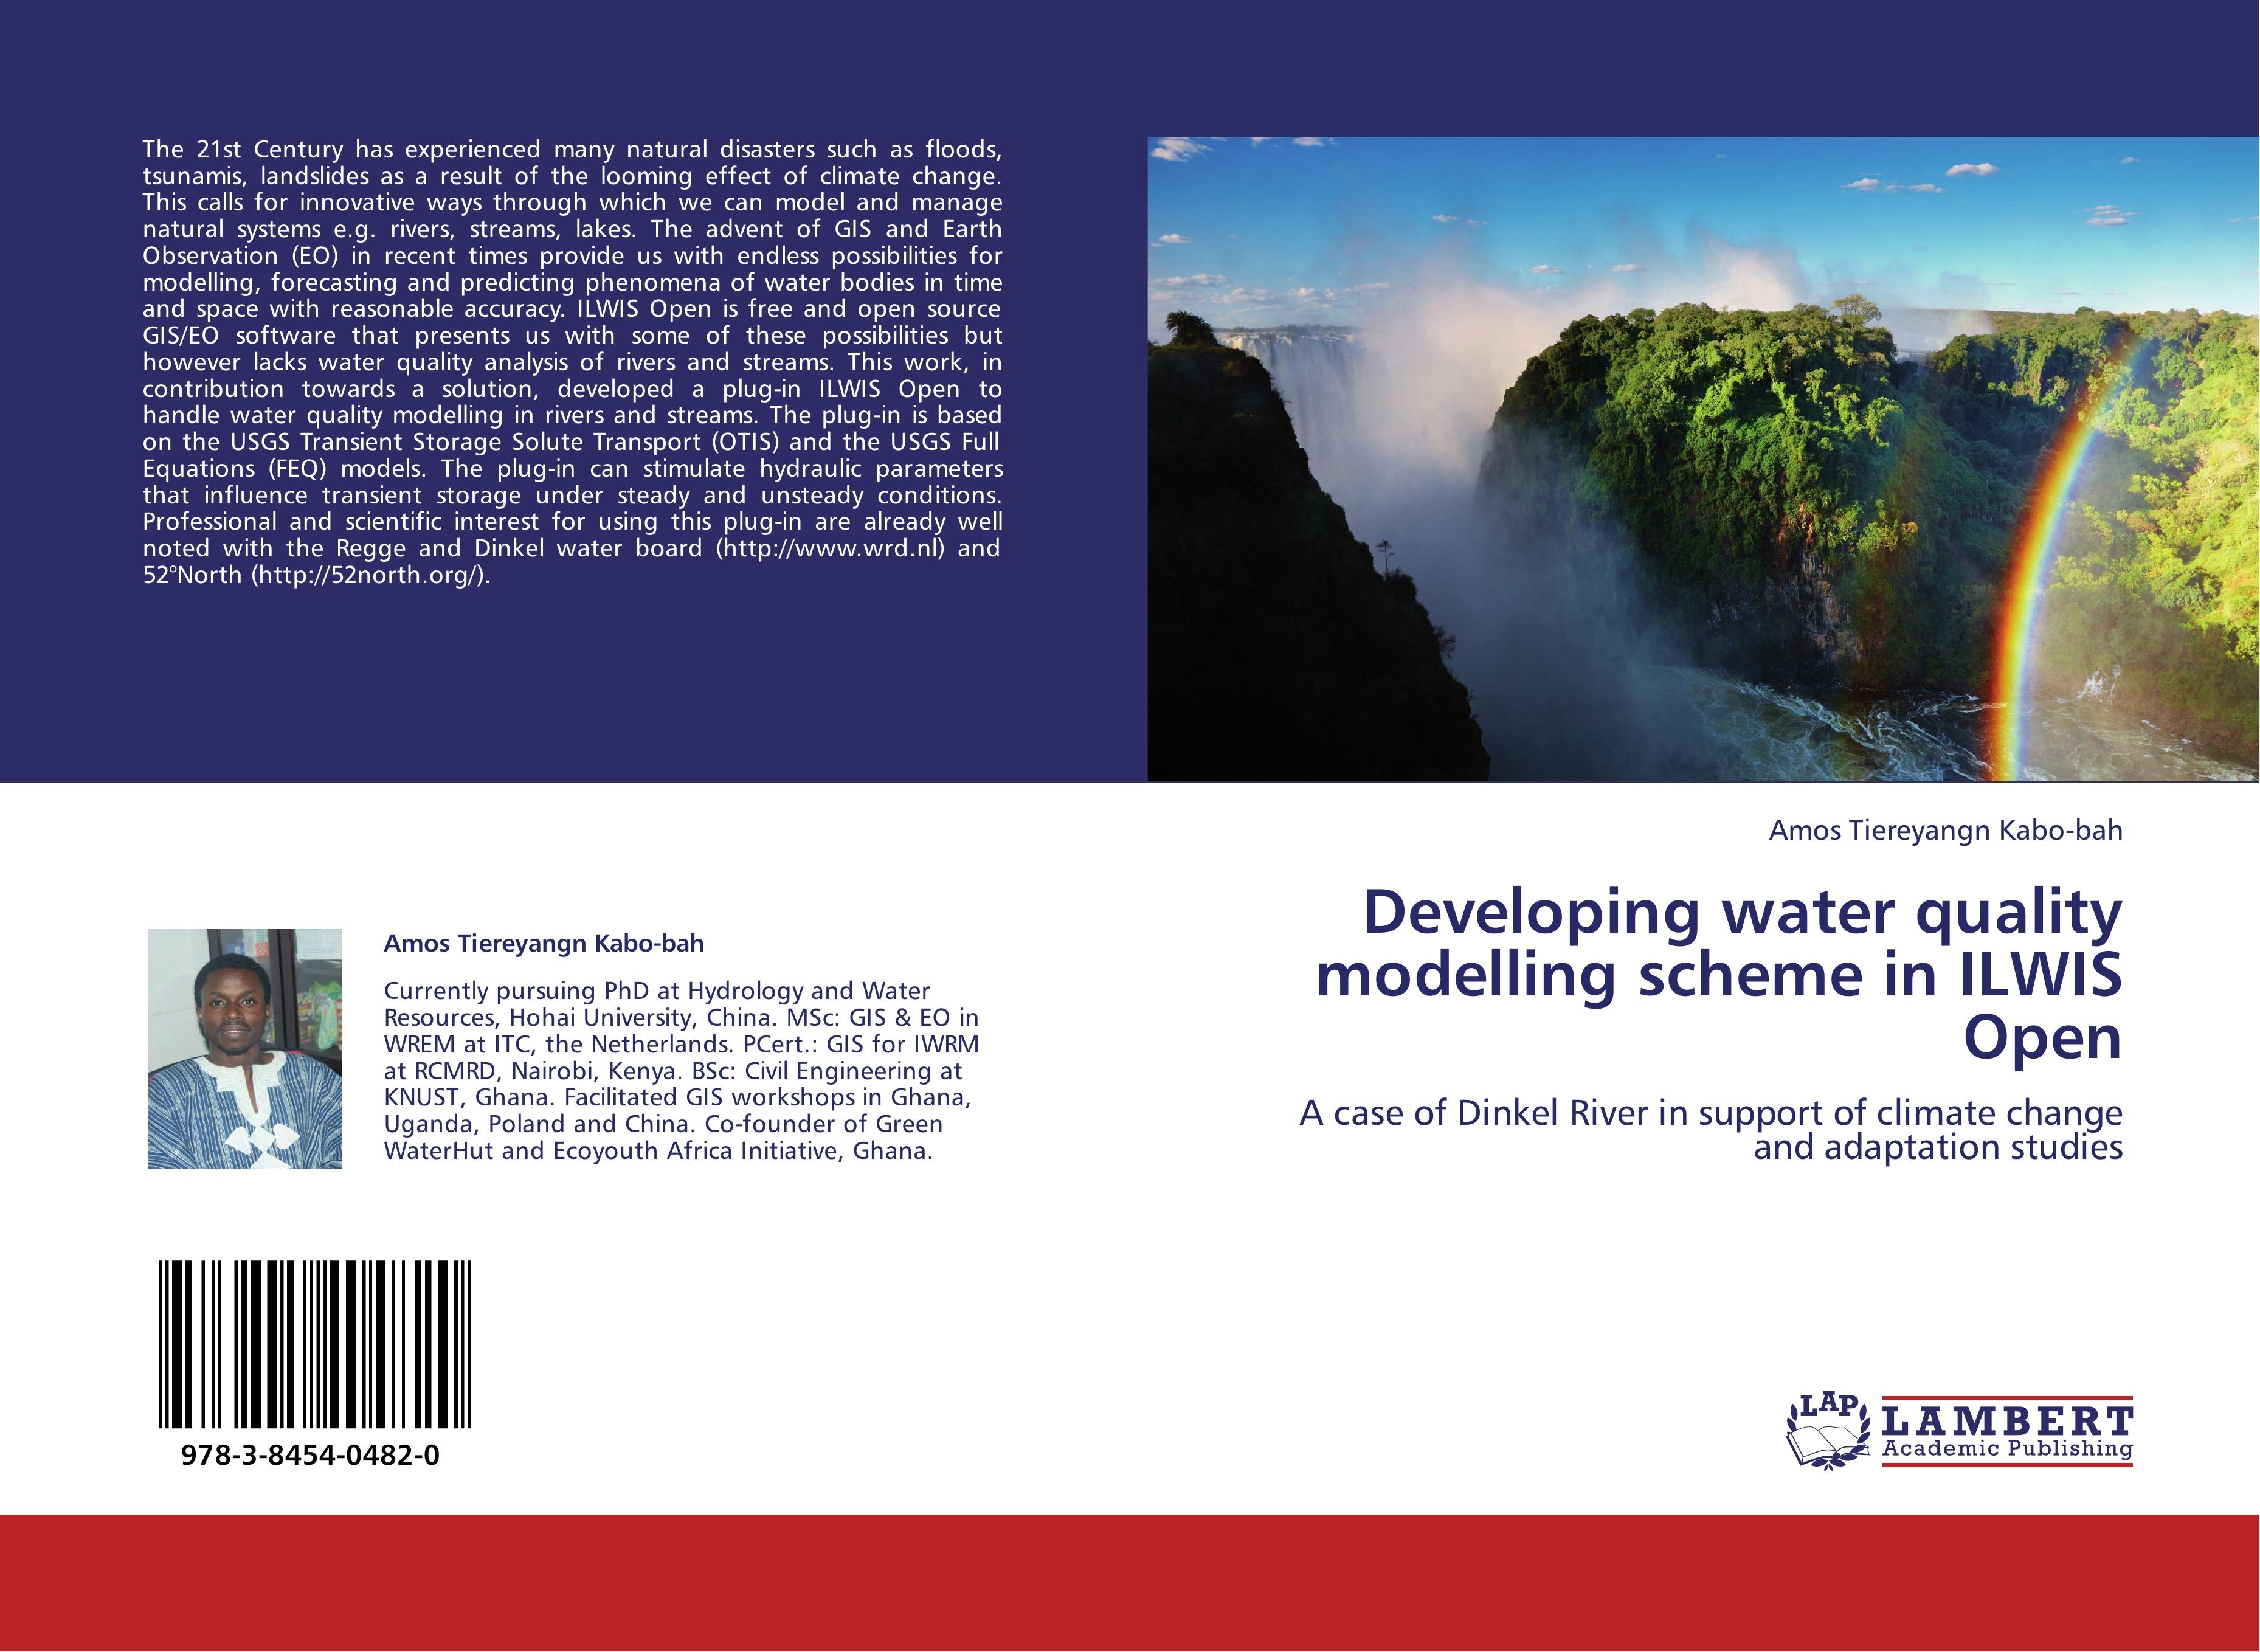 Developing water quality modelling scheme in ILWIS Open - Amos Tiereyangn Kabo-bah